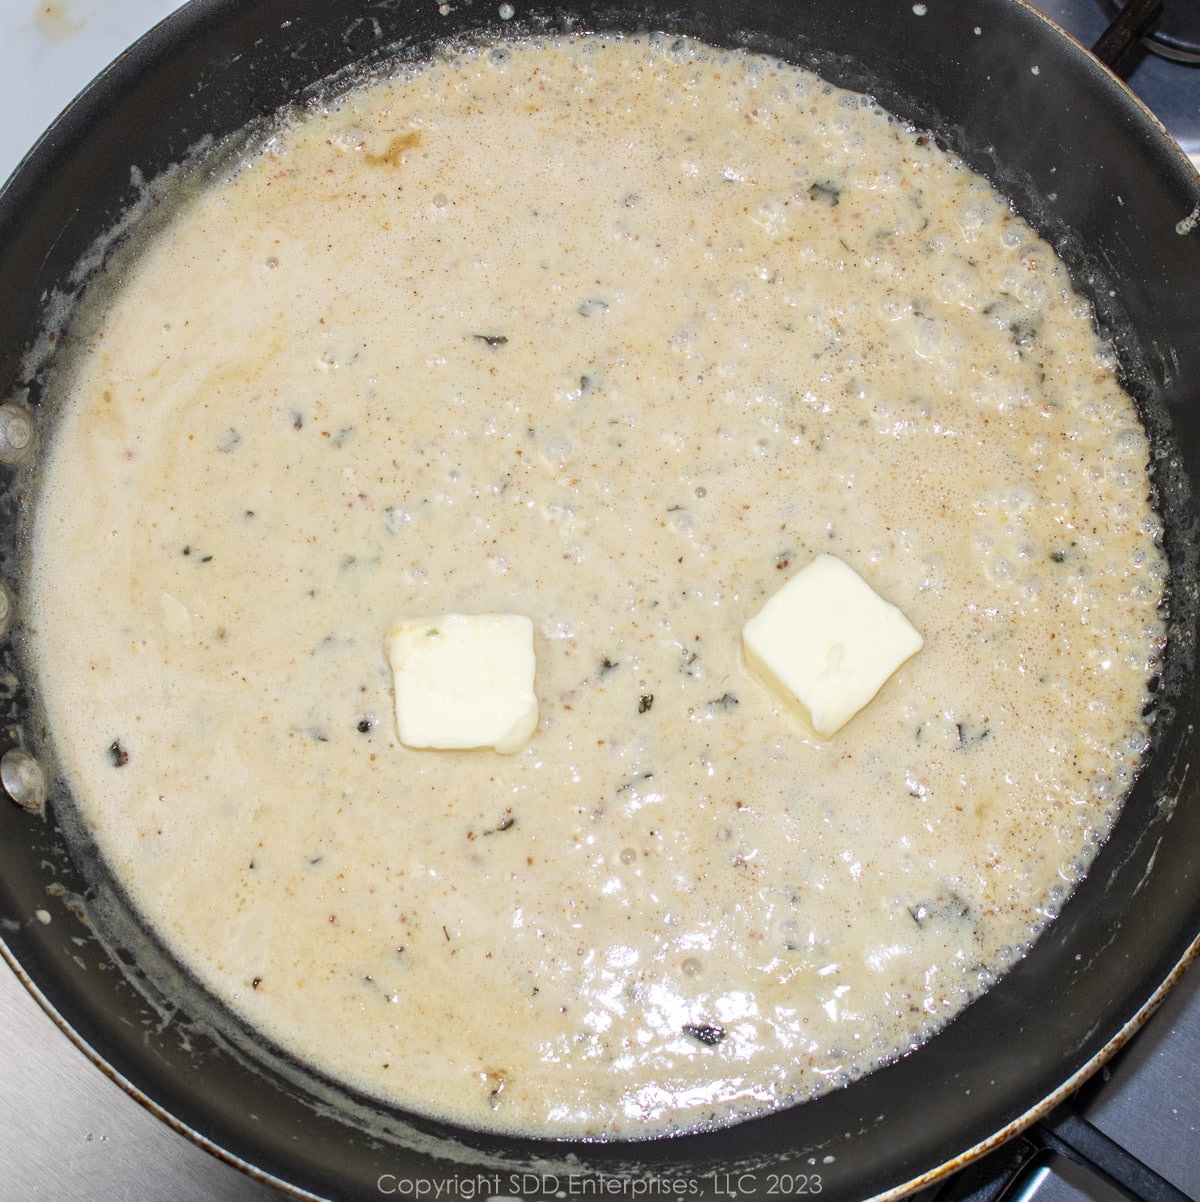 Butter added to simmering sauce in a saute pan